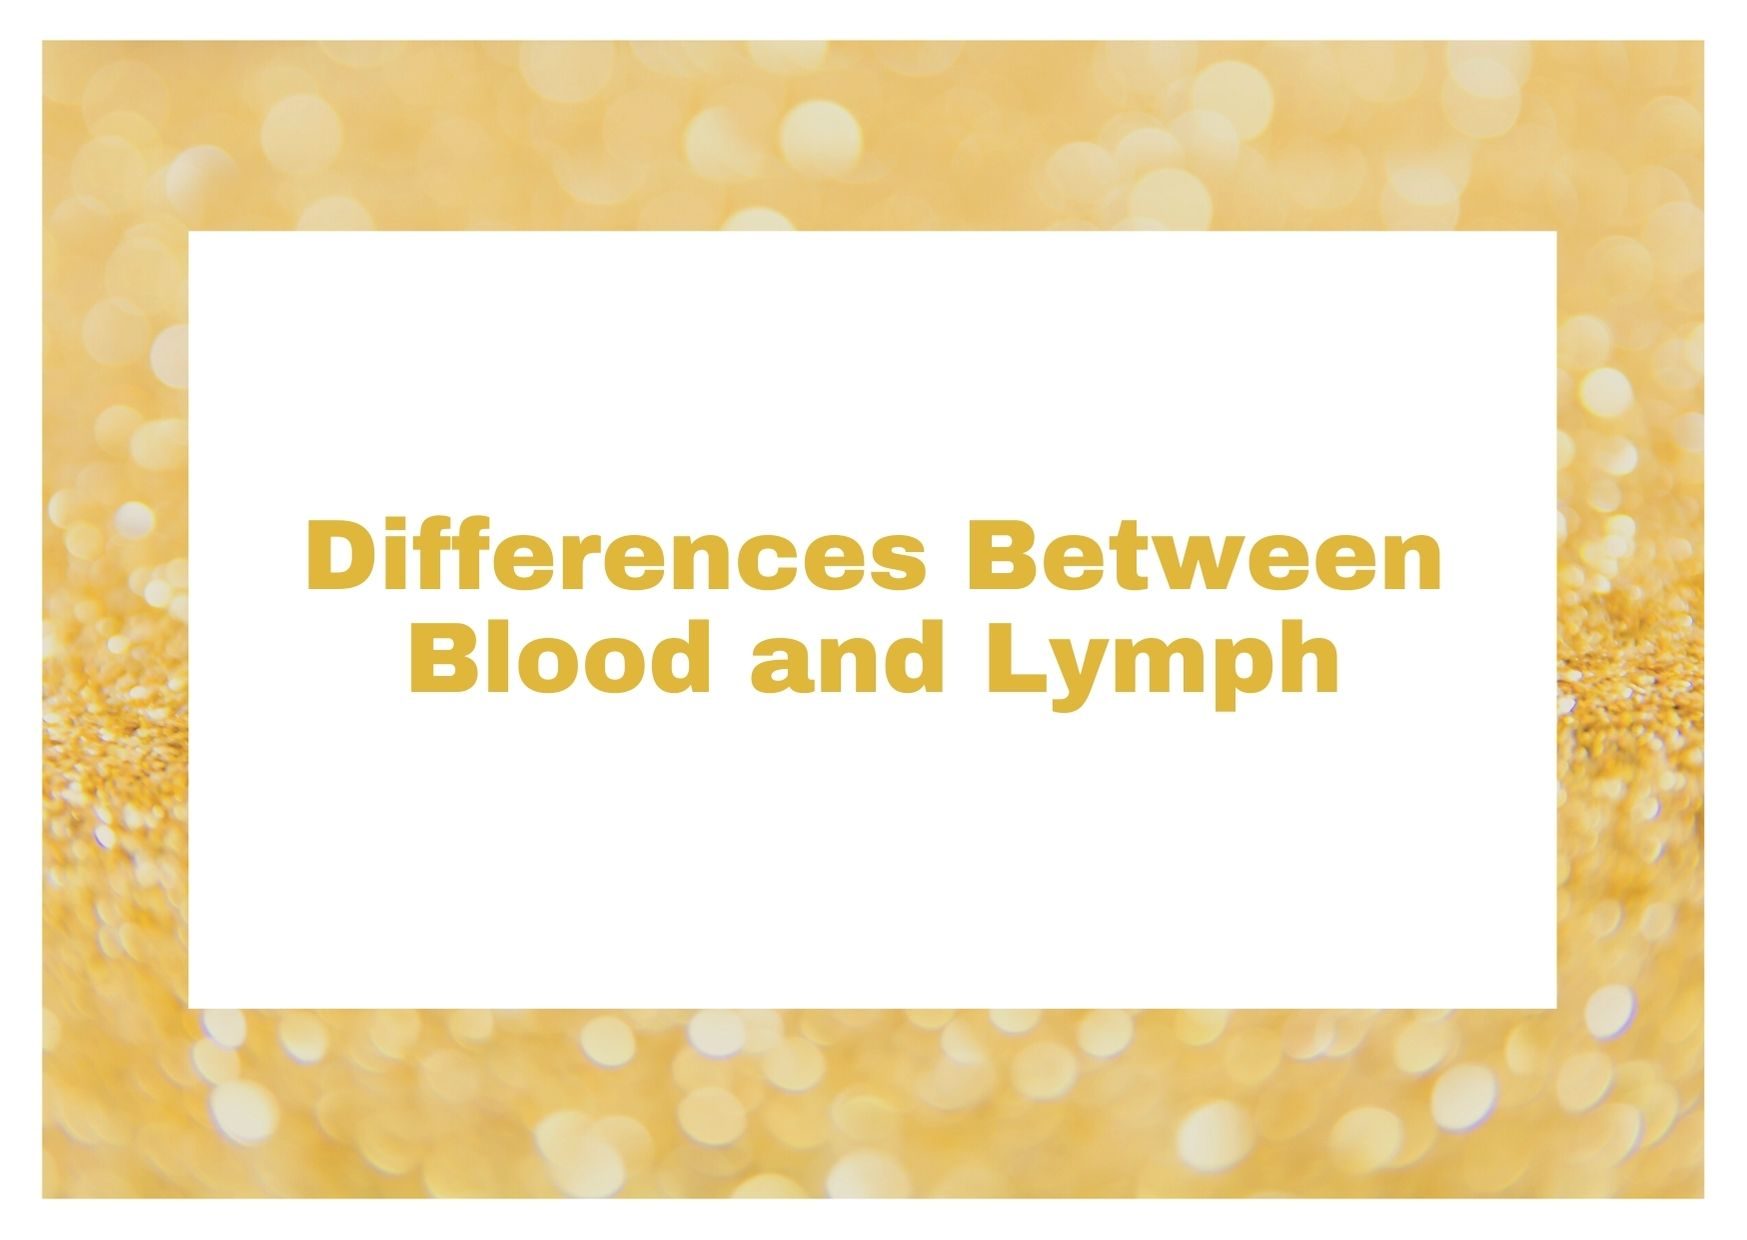 Differences Between Blood and Lymph